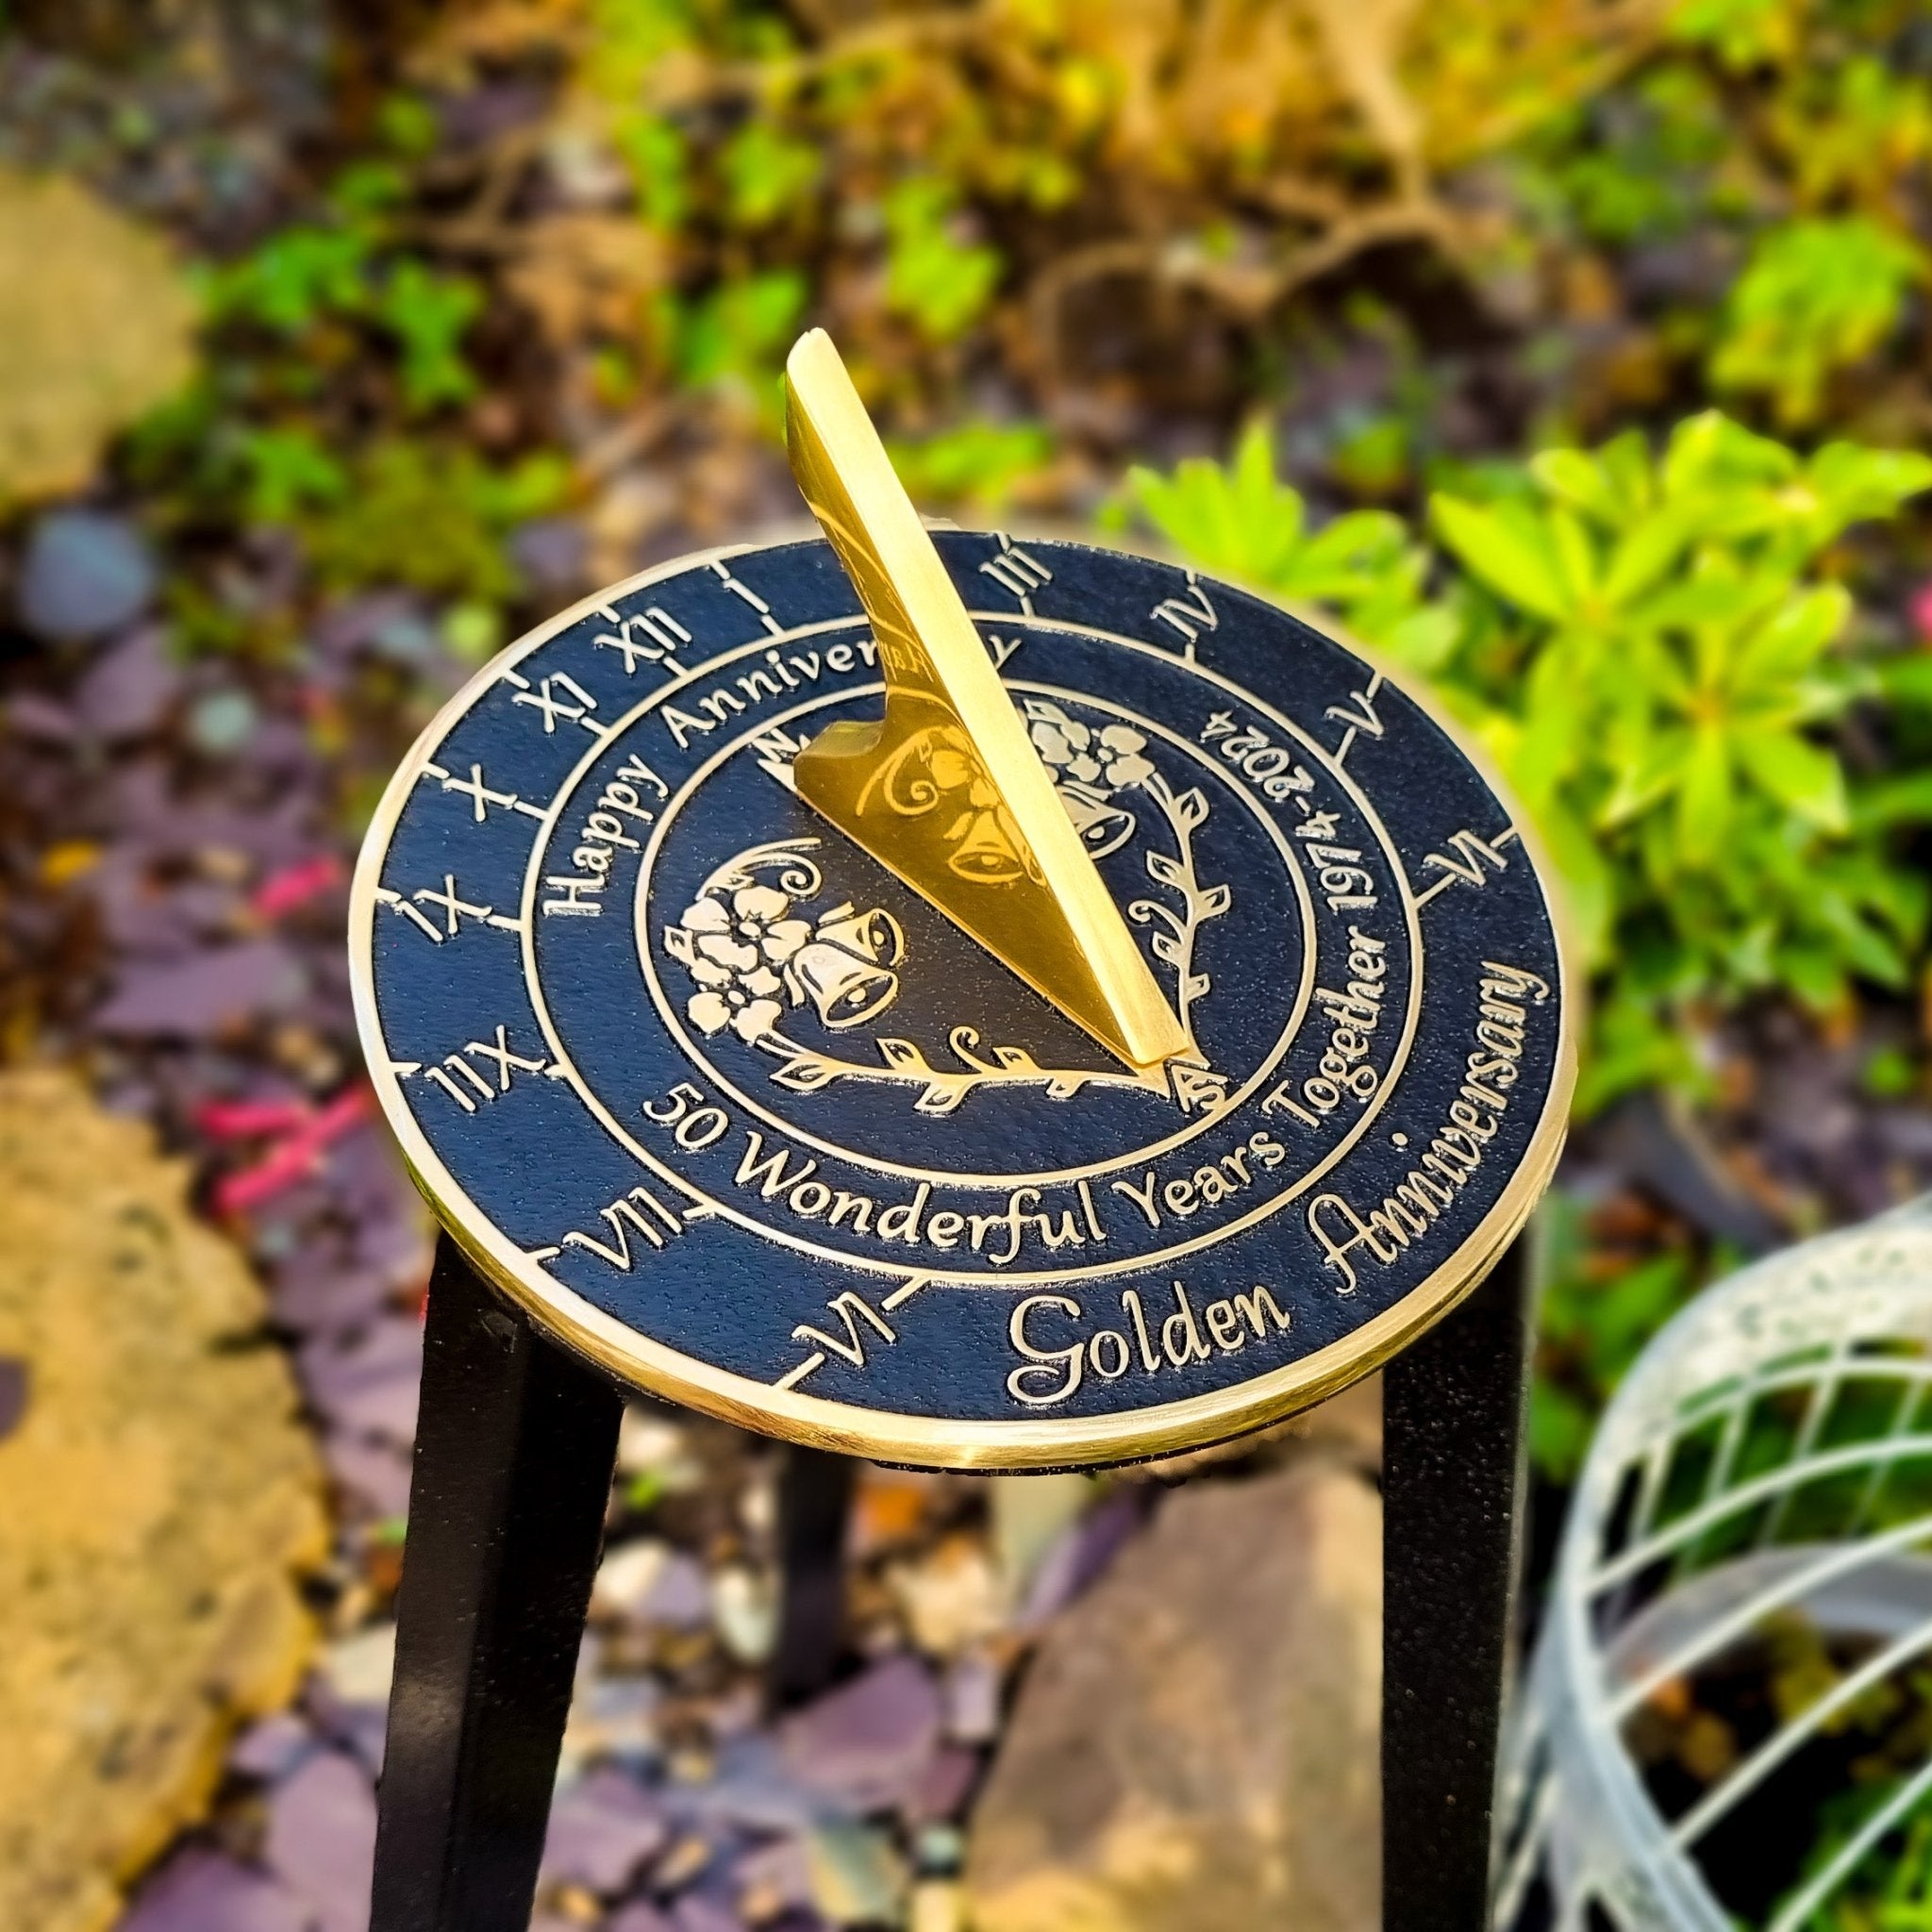 Golden 50th Anniversary Sundial Gift - The Metal Foundry